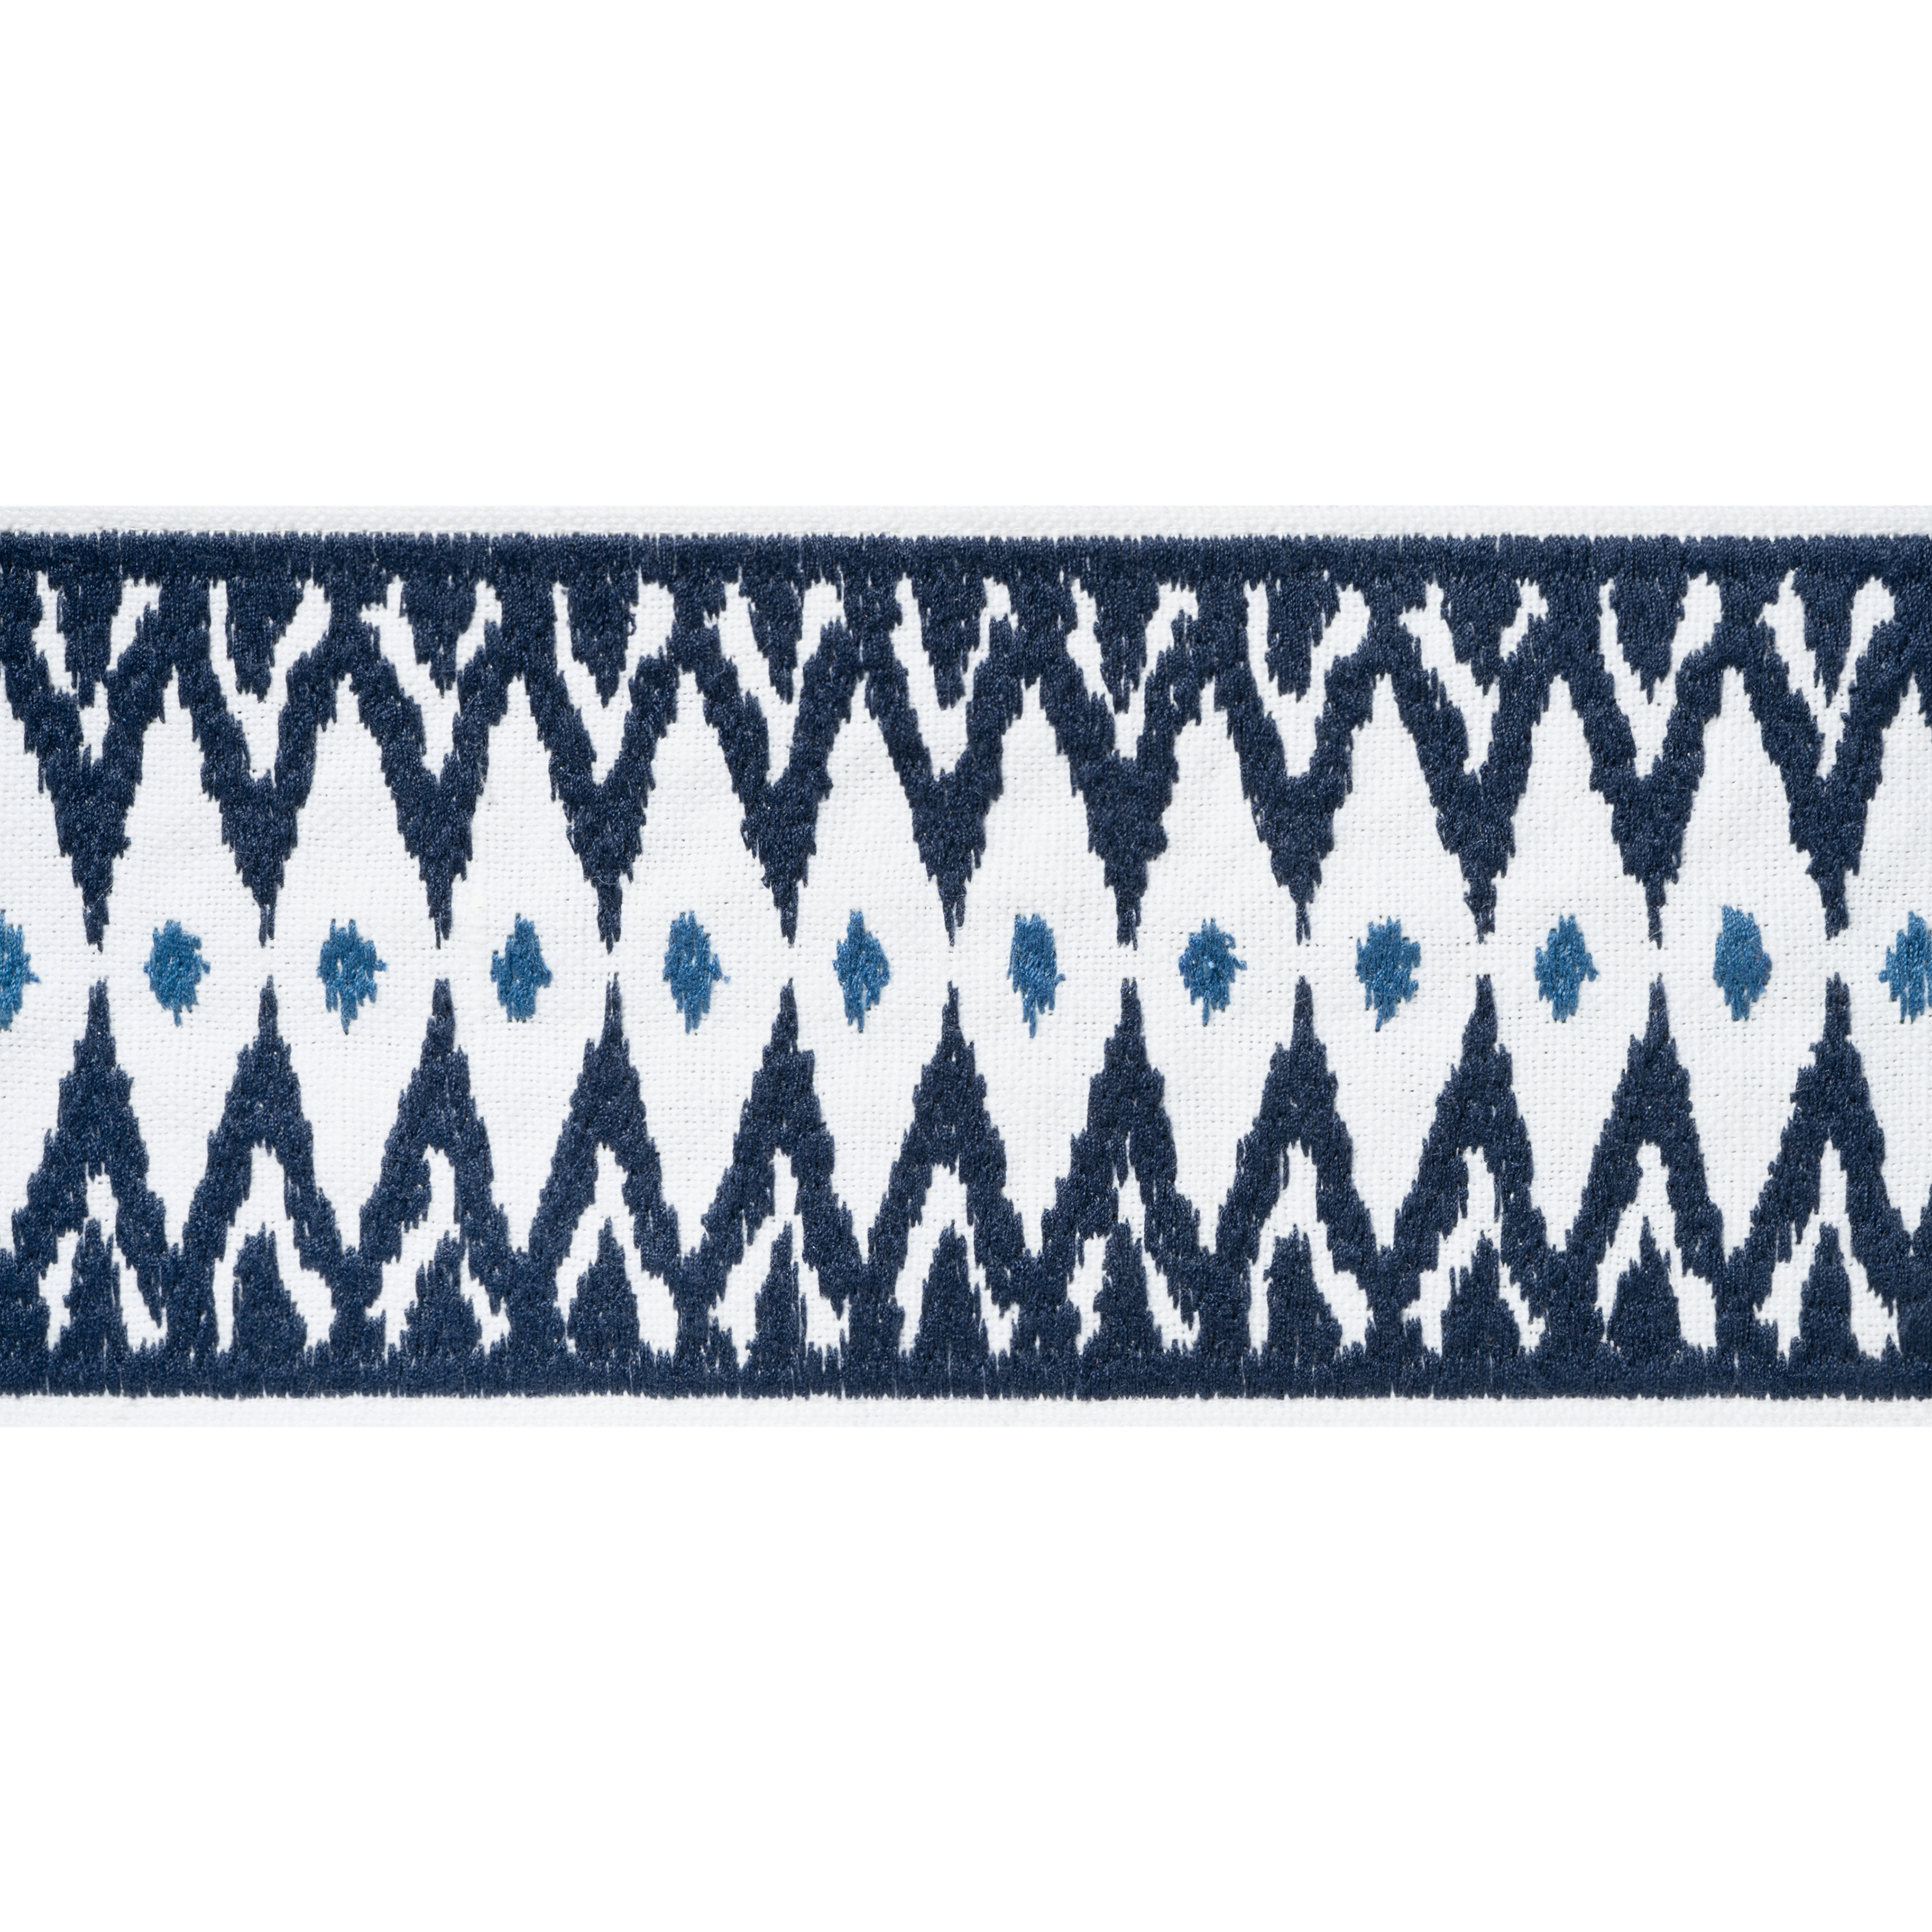 E12047 DELMONT TAPE Tapes Volume 2 the Navy collection Thibaut Trims and Trims: Tapes from 